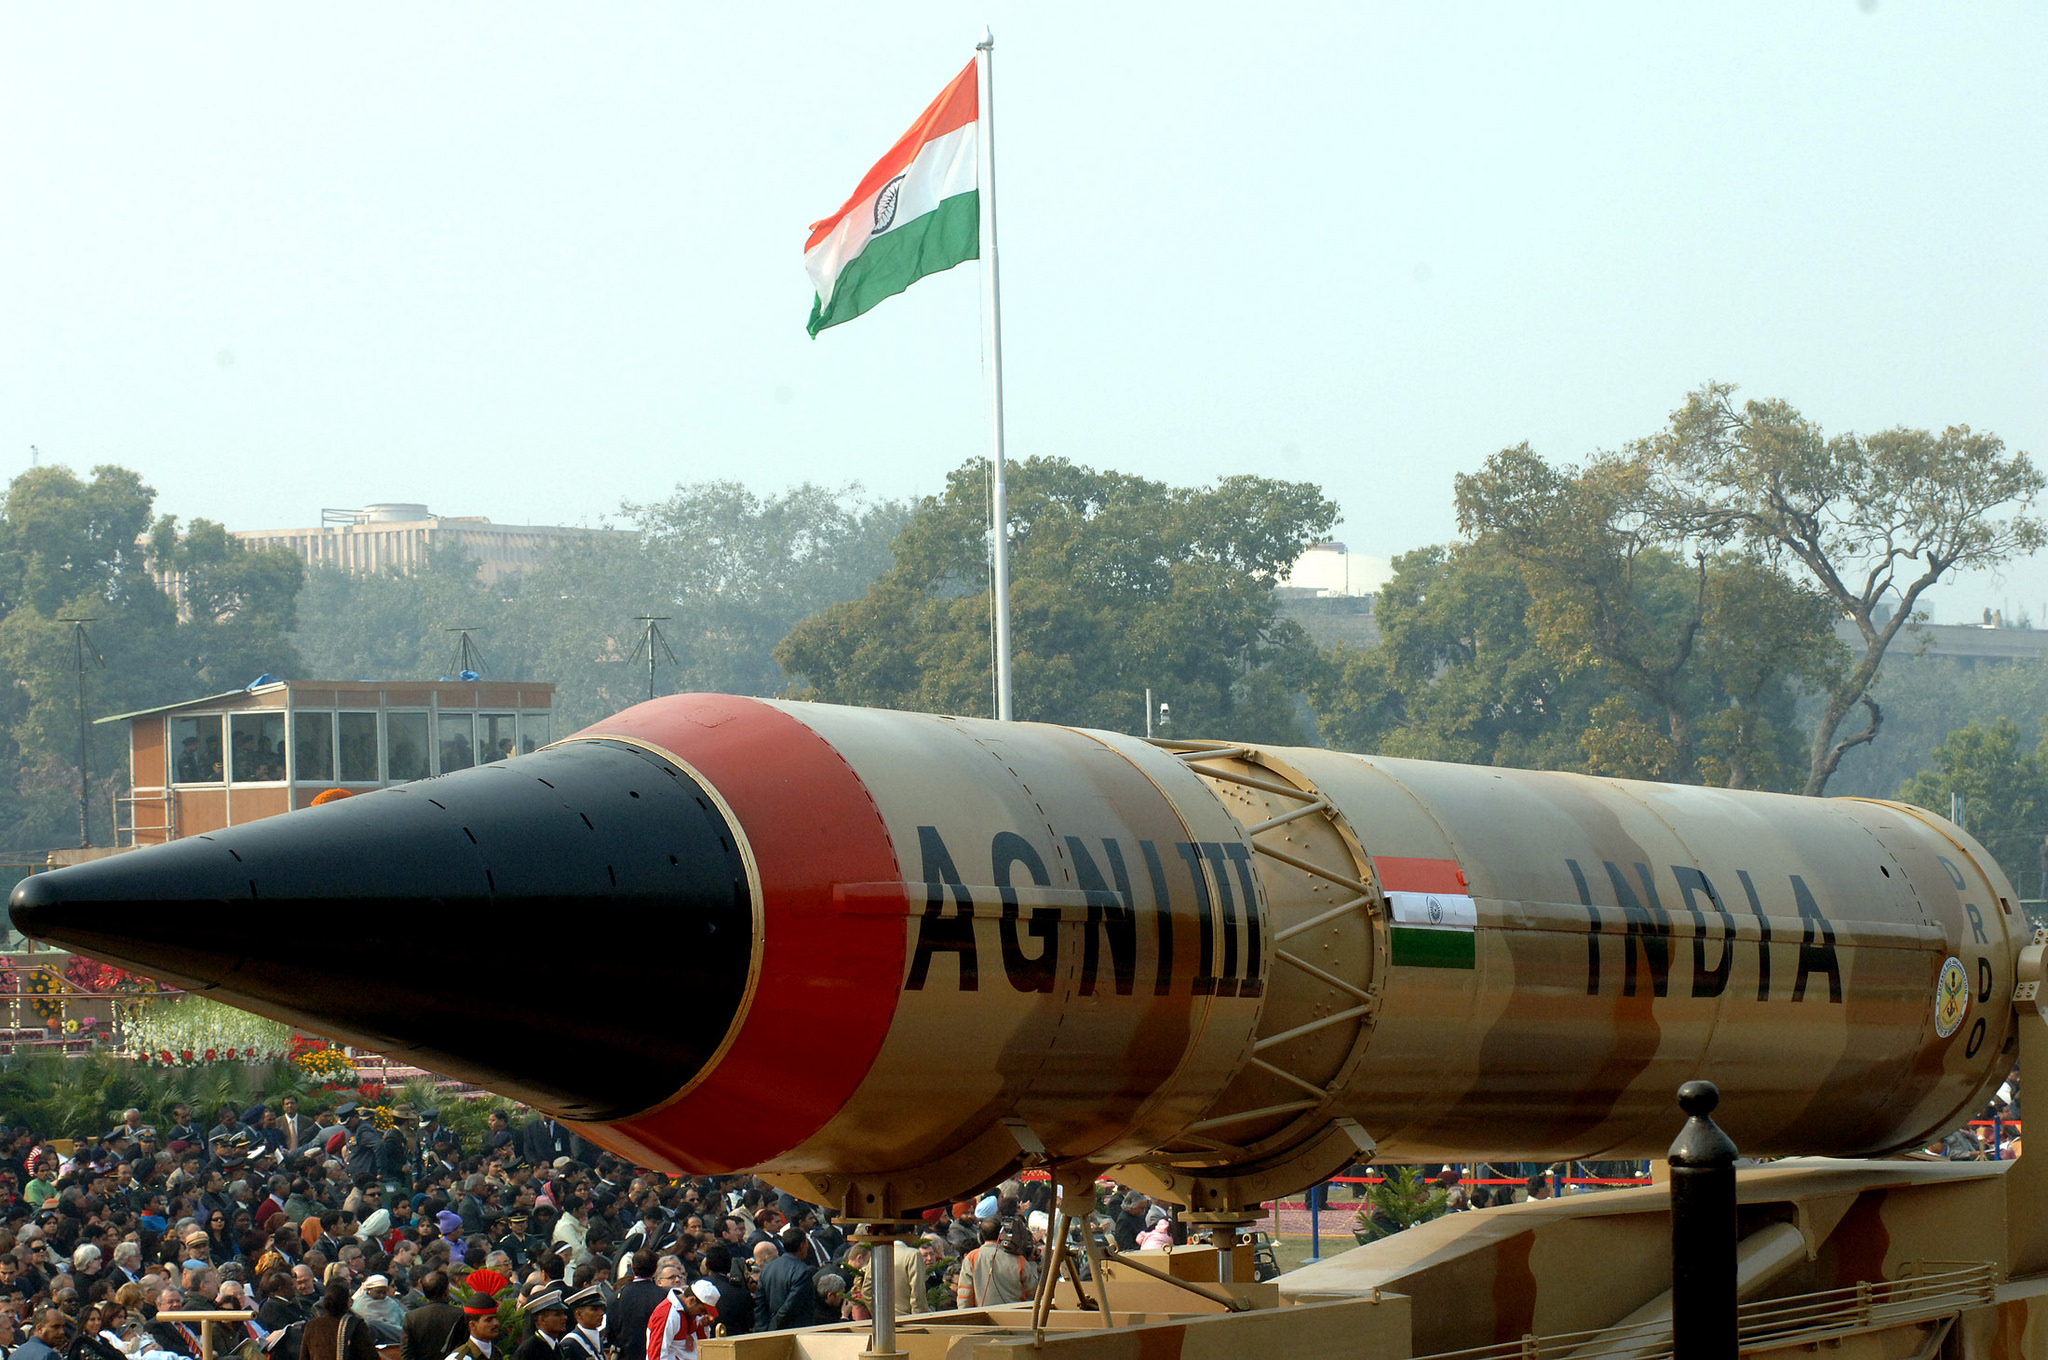 The Agni - III Missile passes through the Rajpath during the 59th Republic Day Parade - 2008, in New Delhi on January 26, 2008.